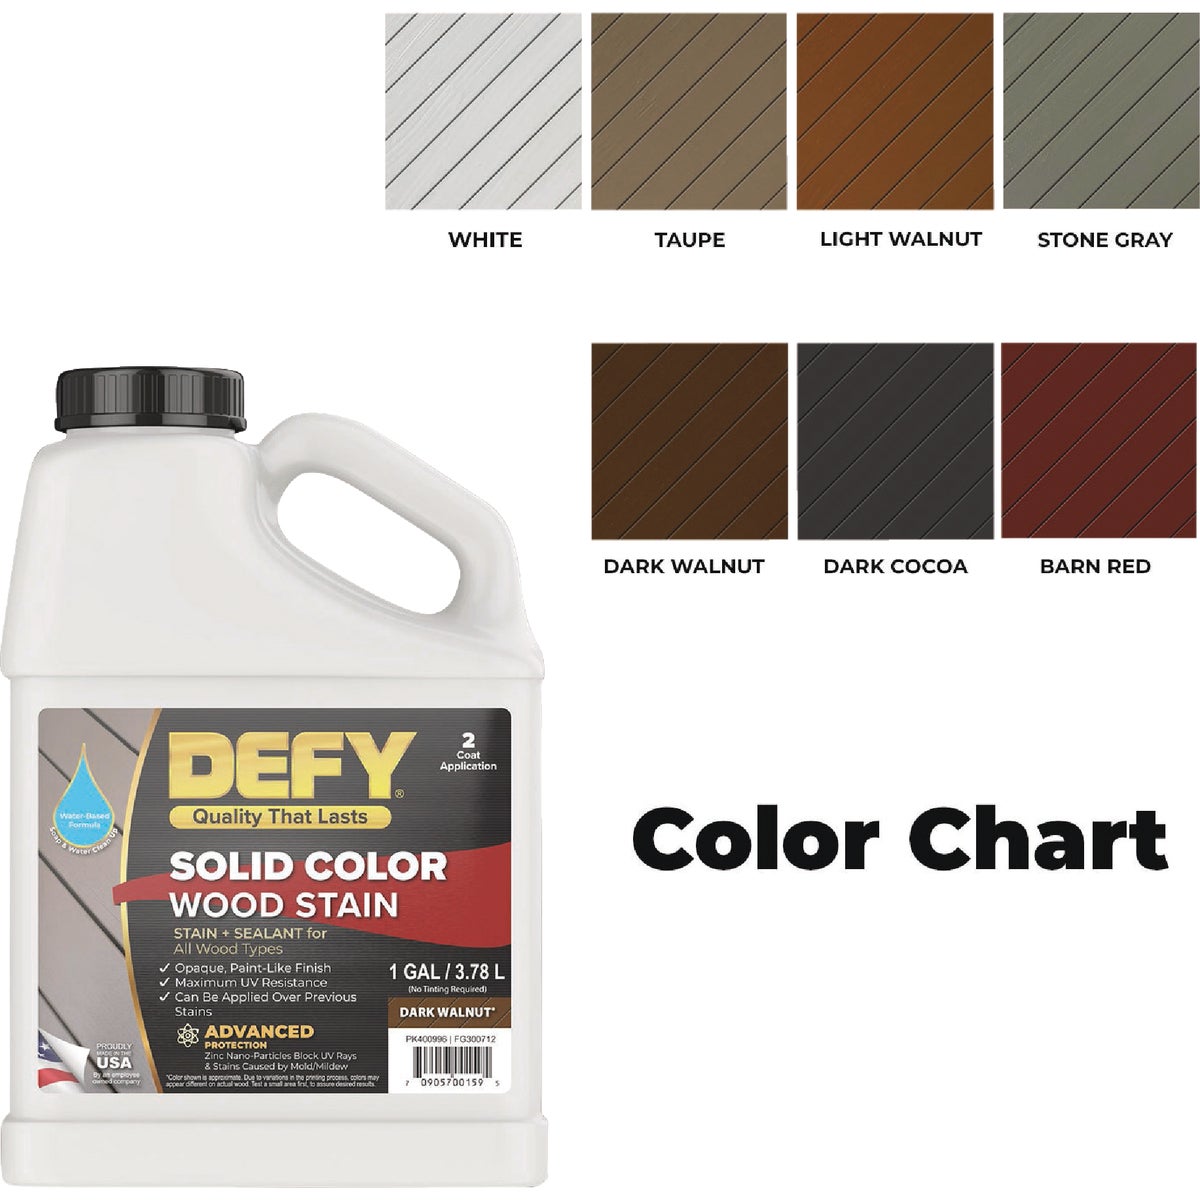 Defy Solid Color Wood Stain, Light Walnut, 1 Gal.